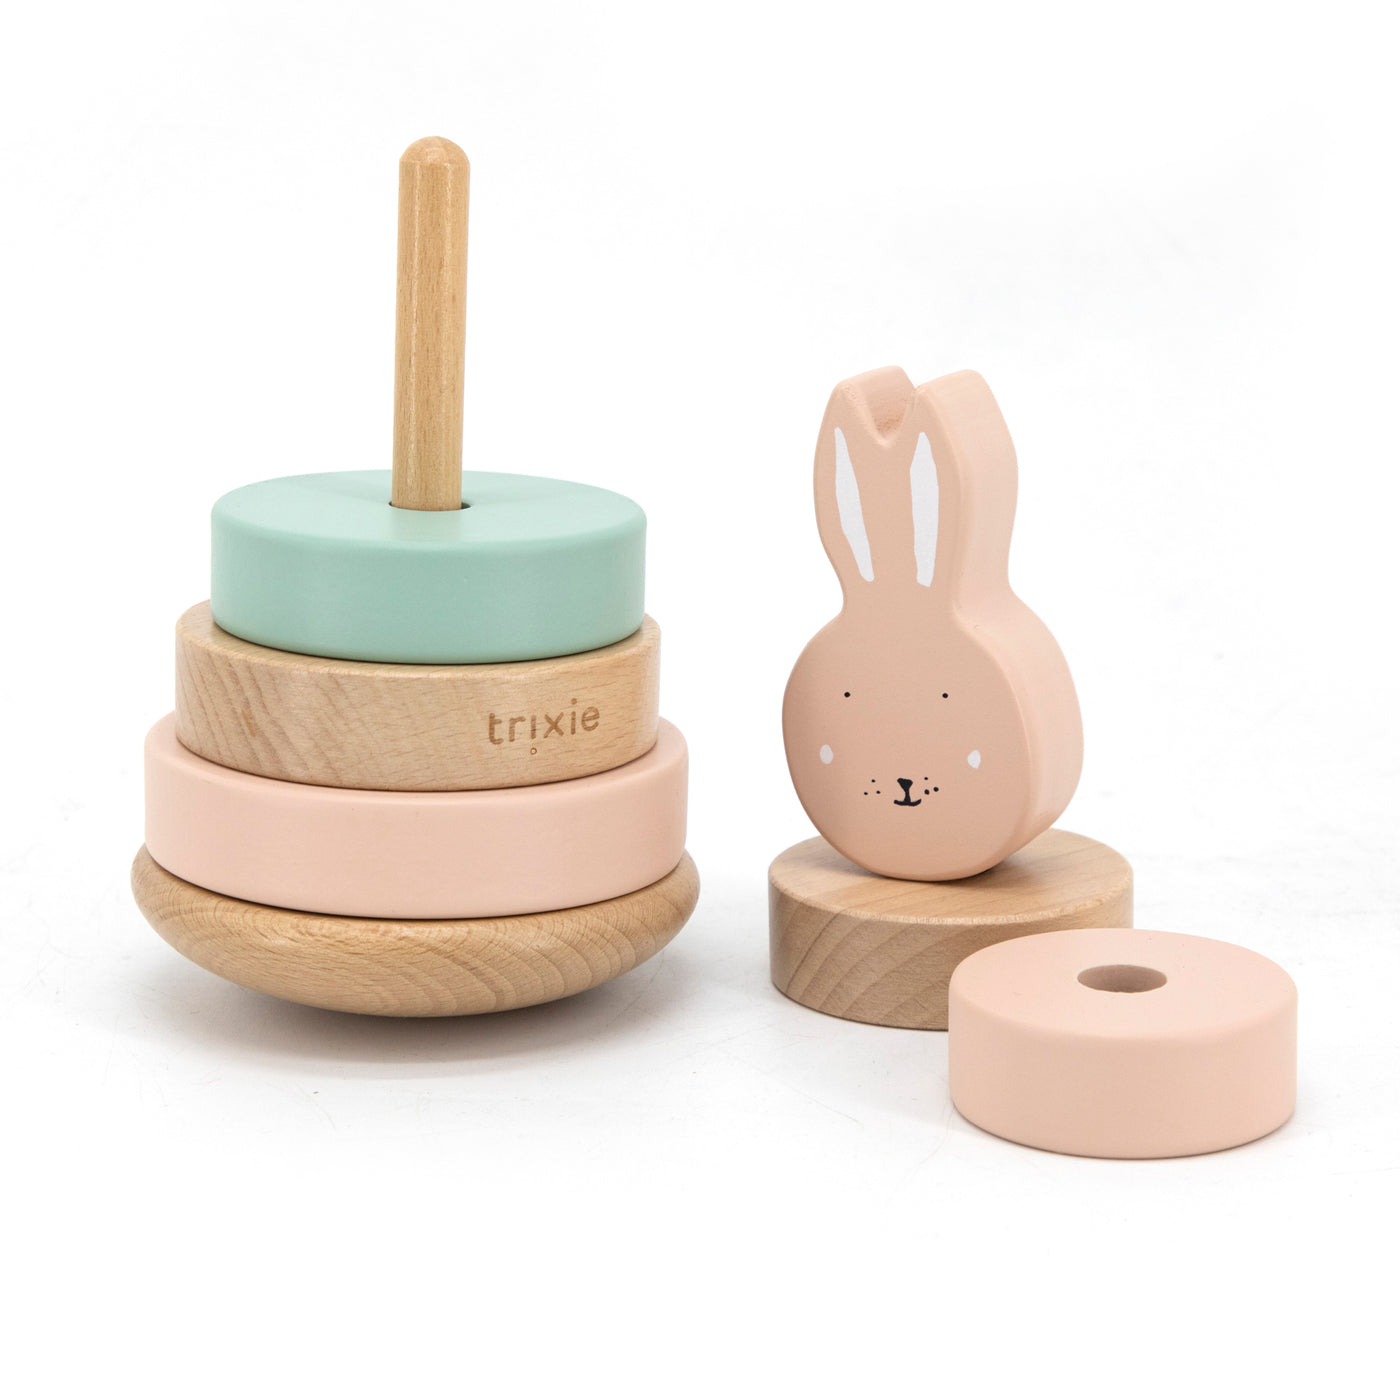 Trixie-Baby Stacking Toy - Mrs Rabbit